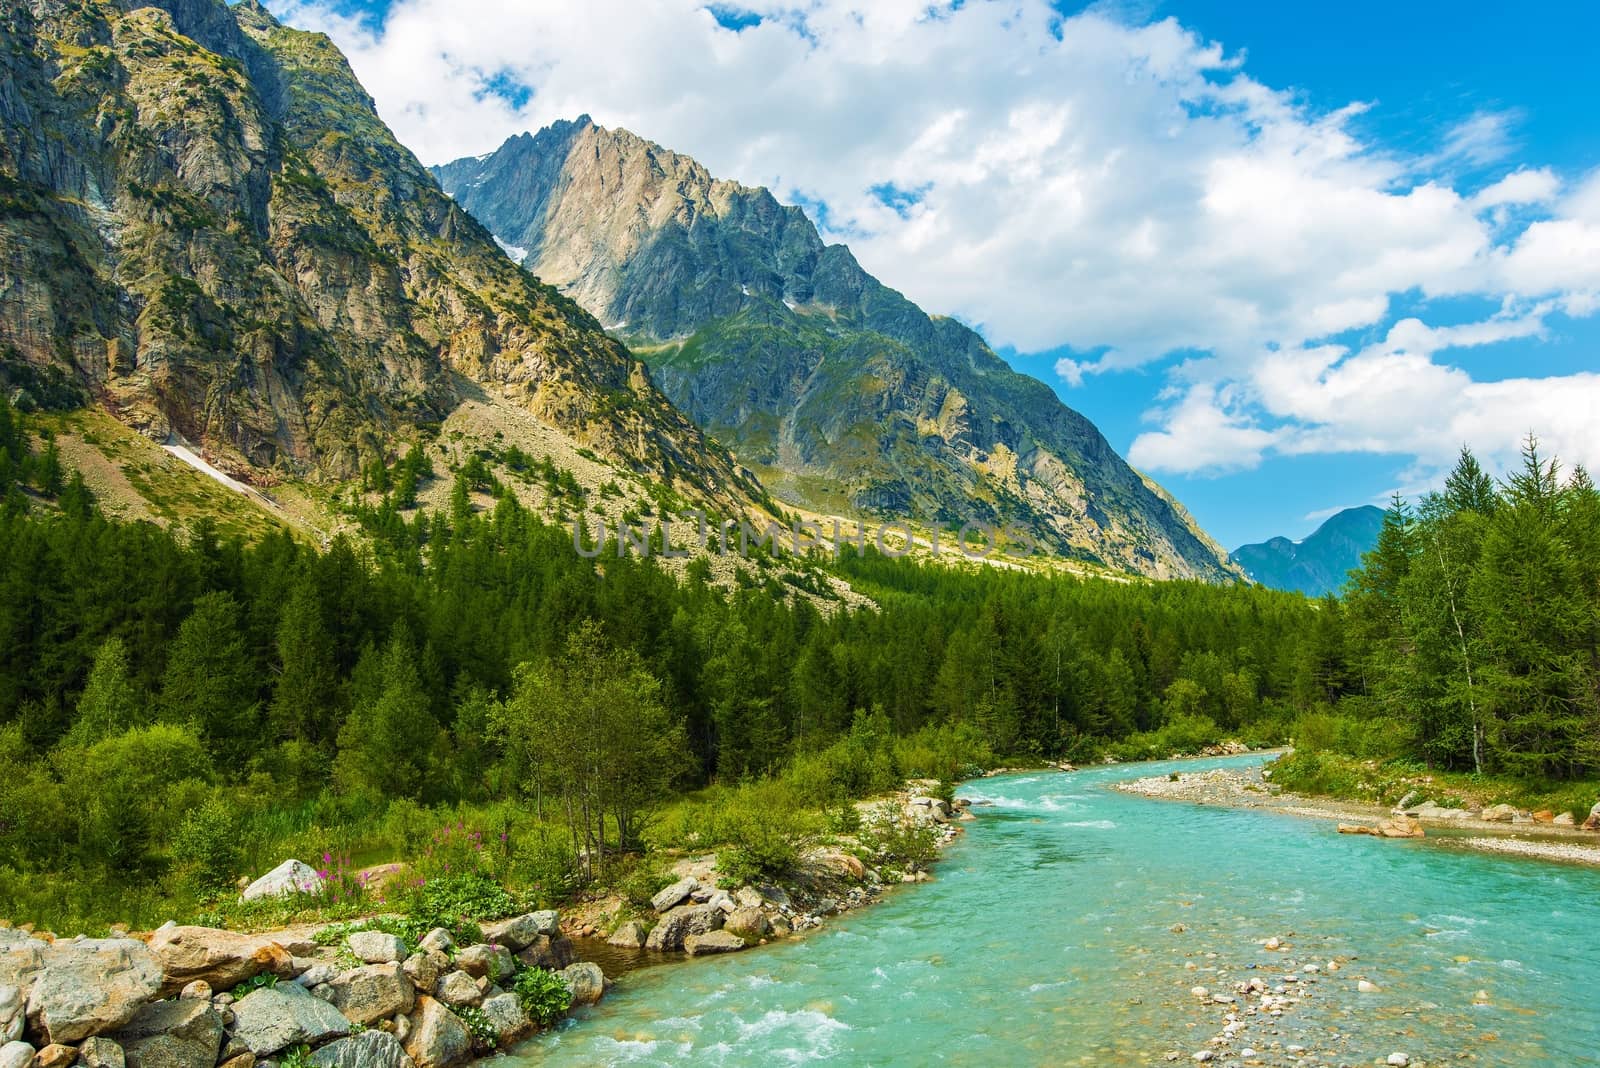 Italian Alps Doire Baltee River Scenery. Northern Italy, Europe. Alpine Landscape with Mountain River.